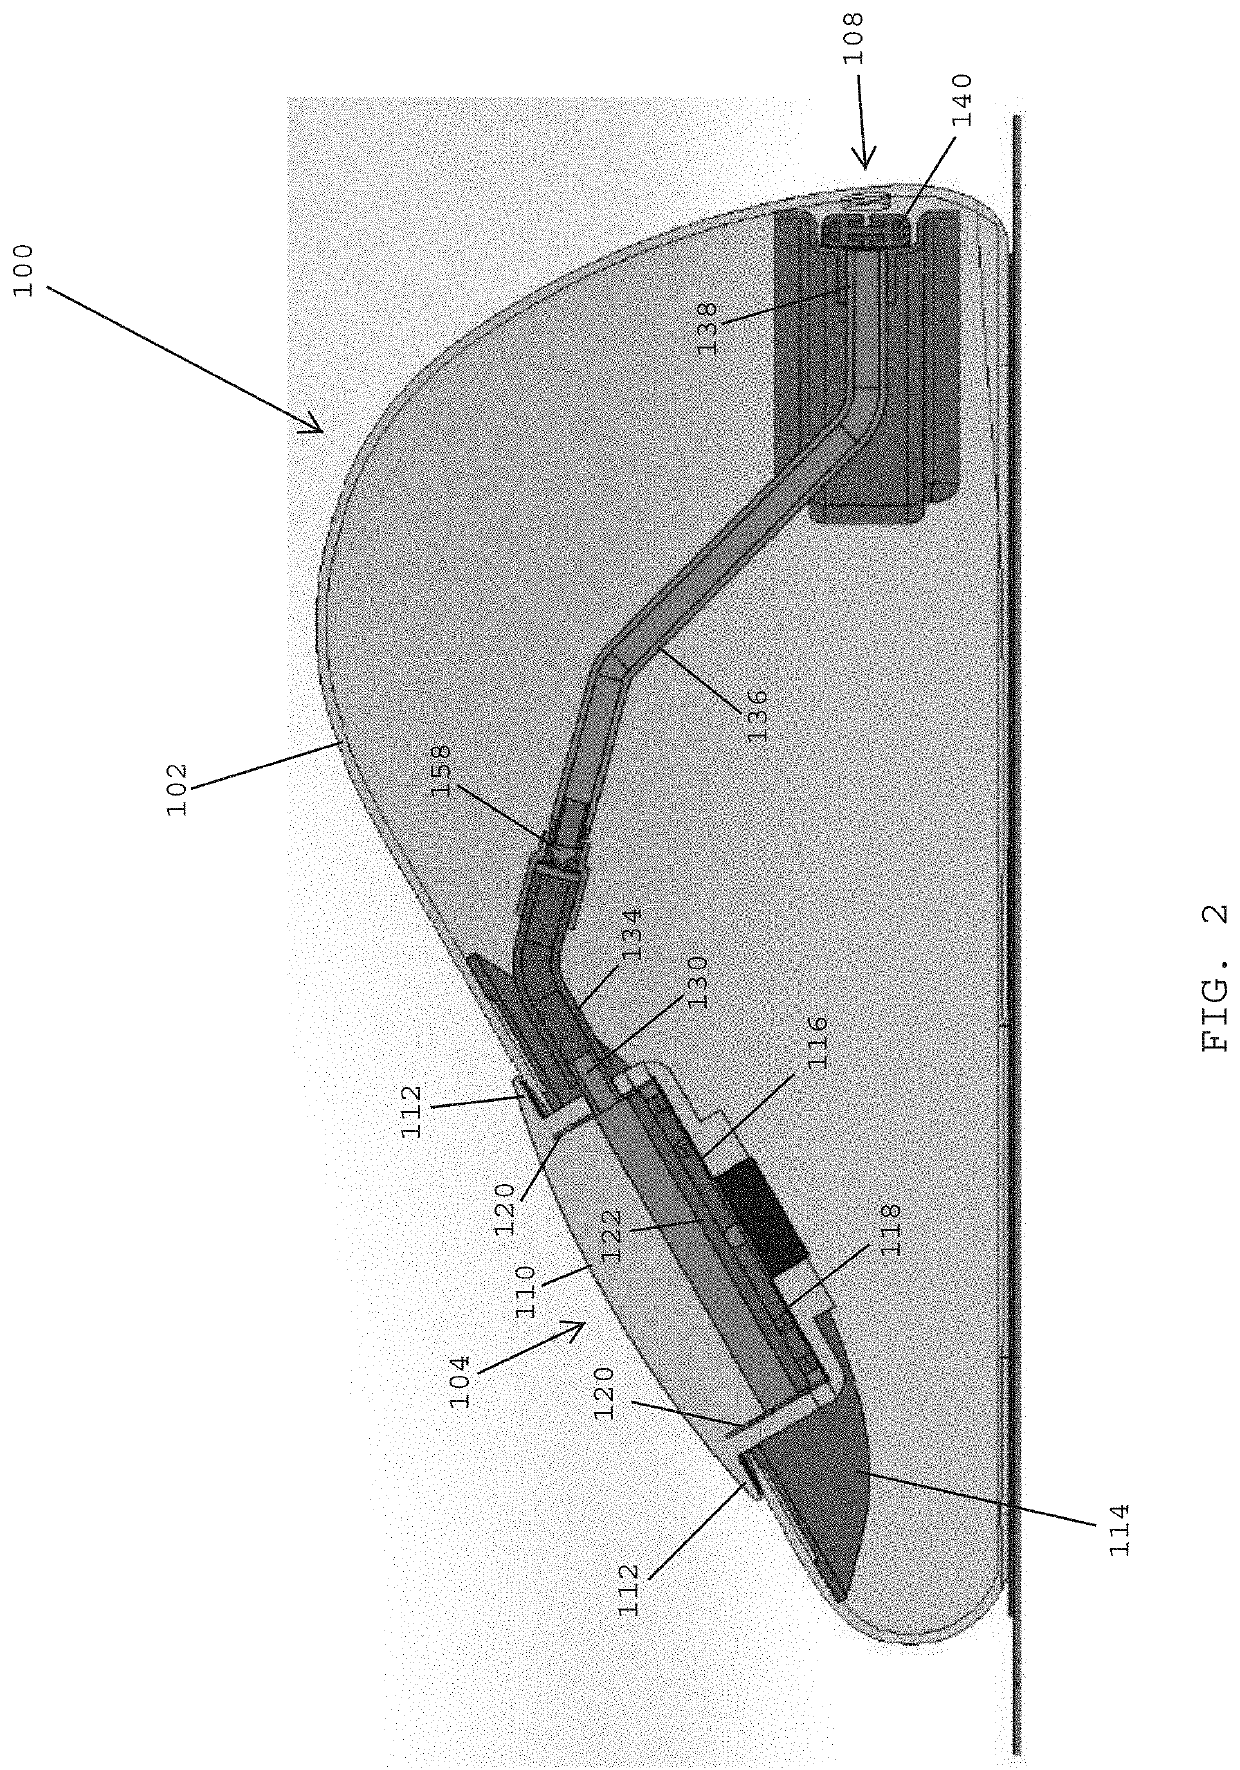 Tissue expanders having integrated drainage and moveable barrier membranes